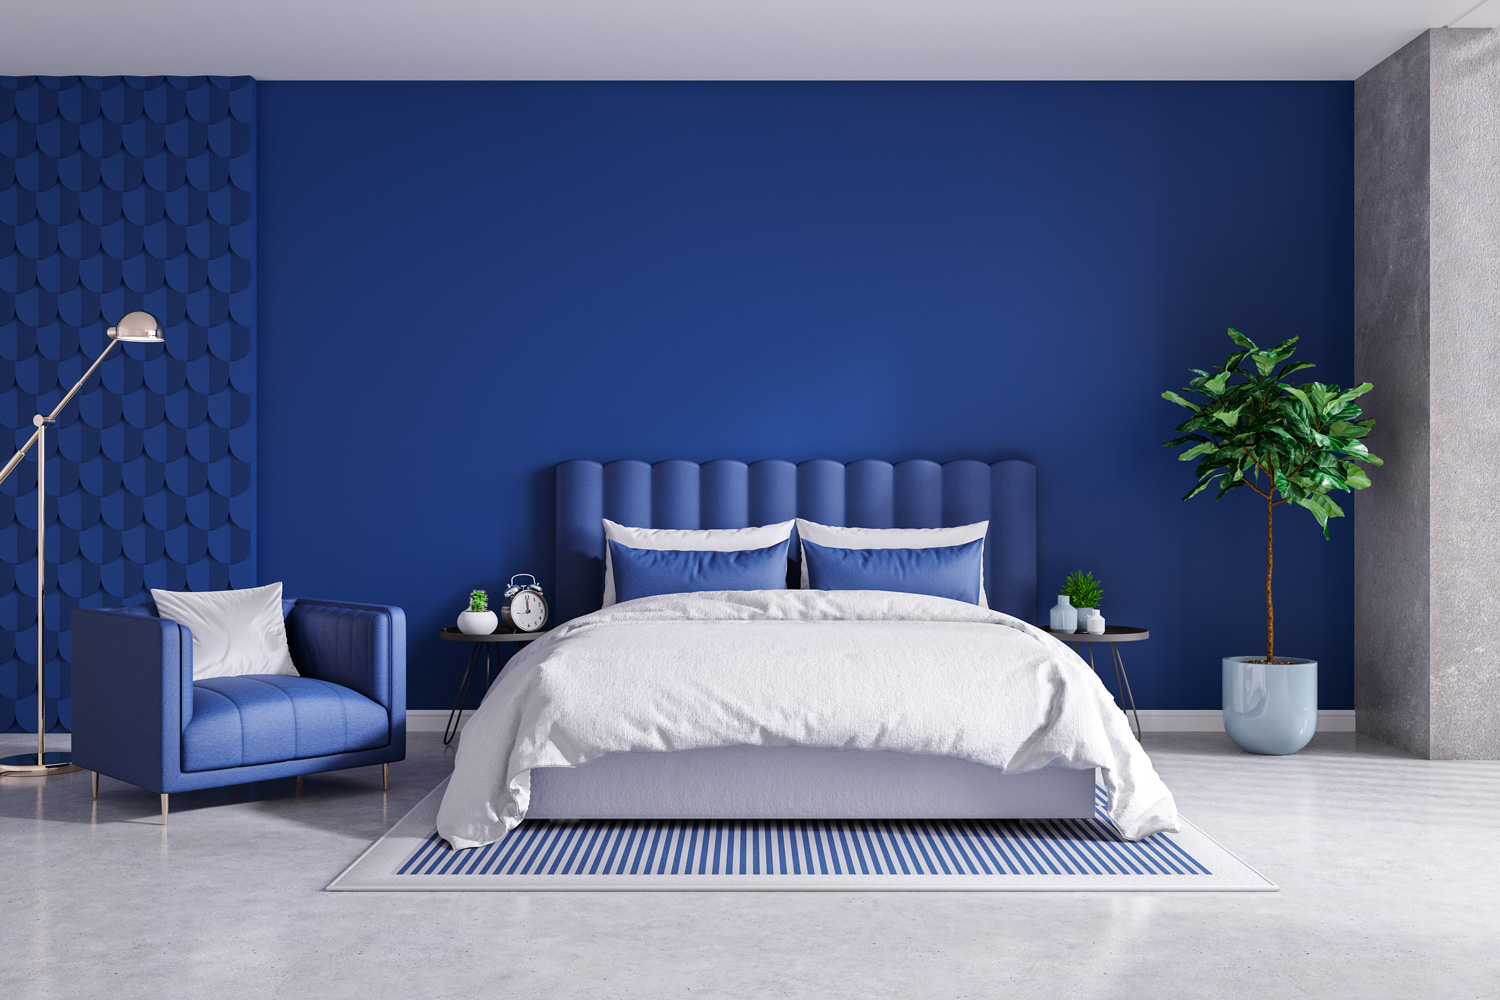 Modern bedroom and decorating ideas ,classic blue room